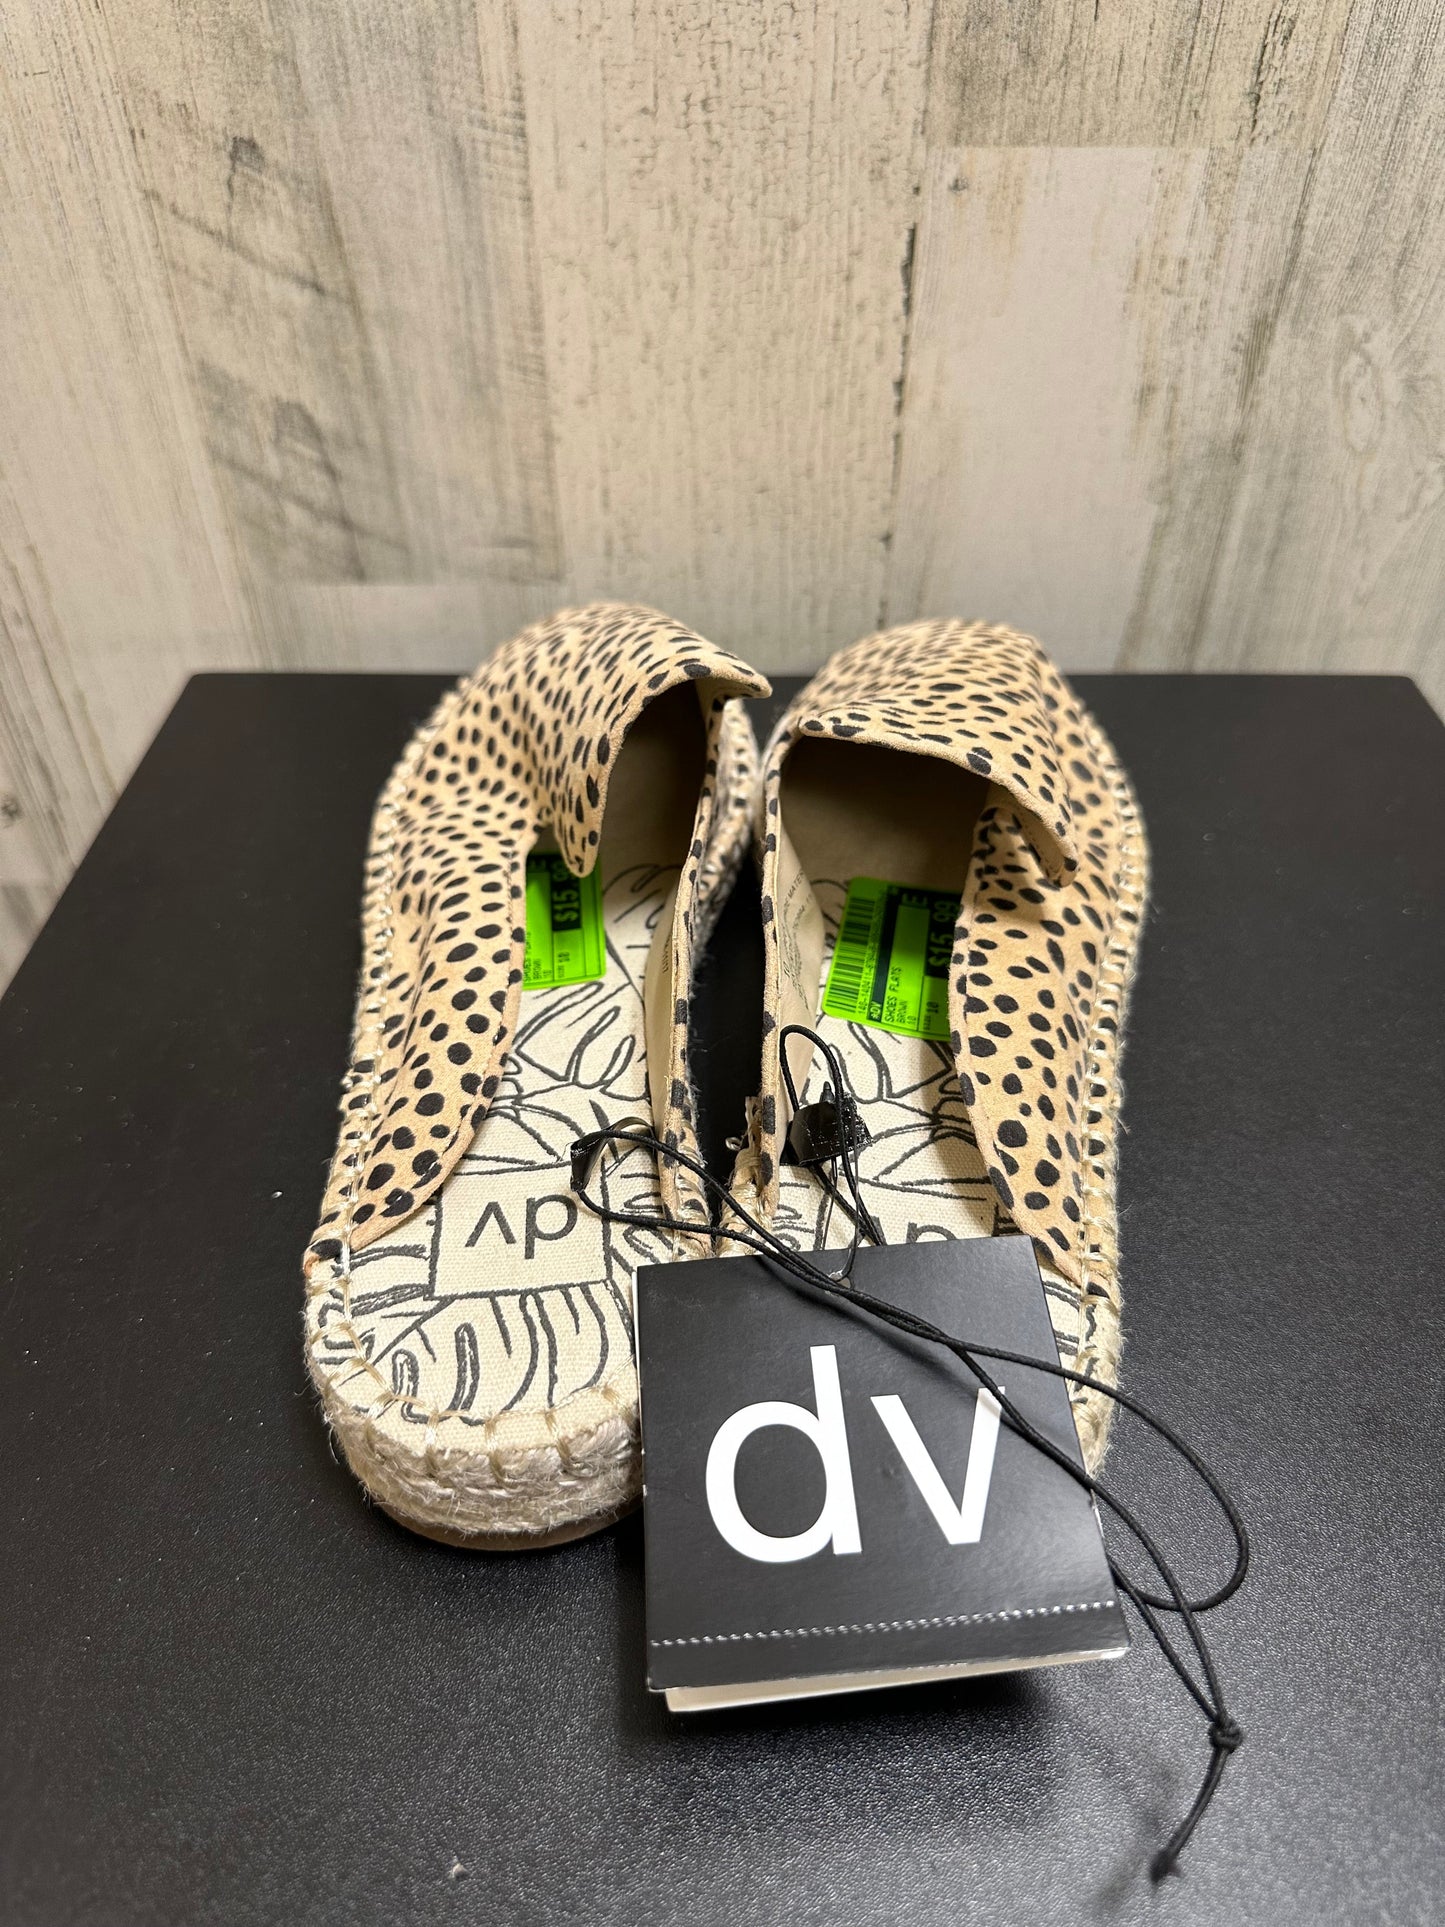 Shoes Flats By Dv  Size: 10